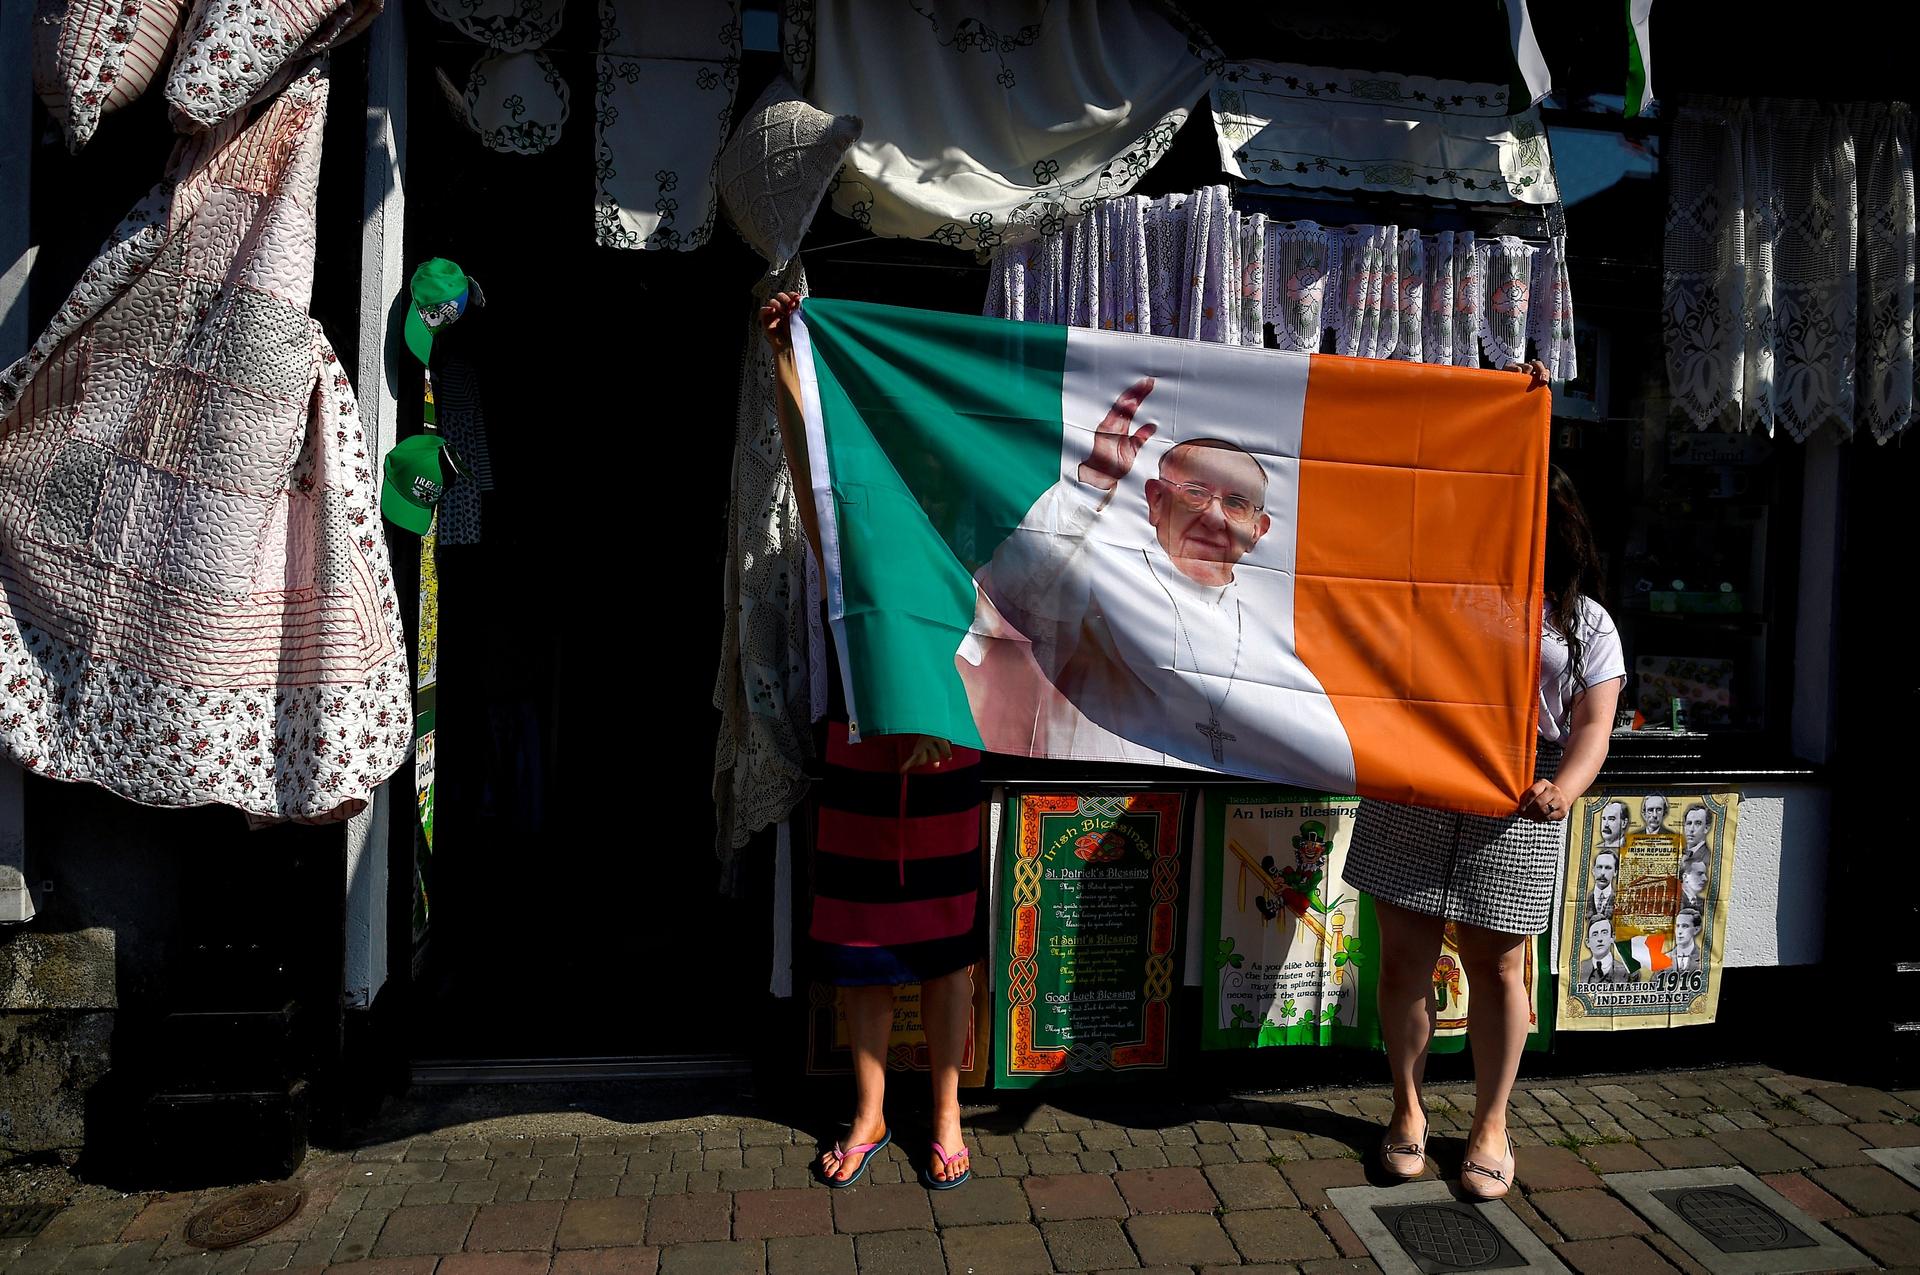 Women from a haberdashery shop hold up their new Pope Francis Ireland flag